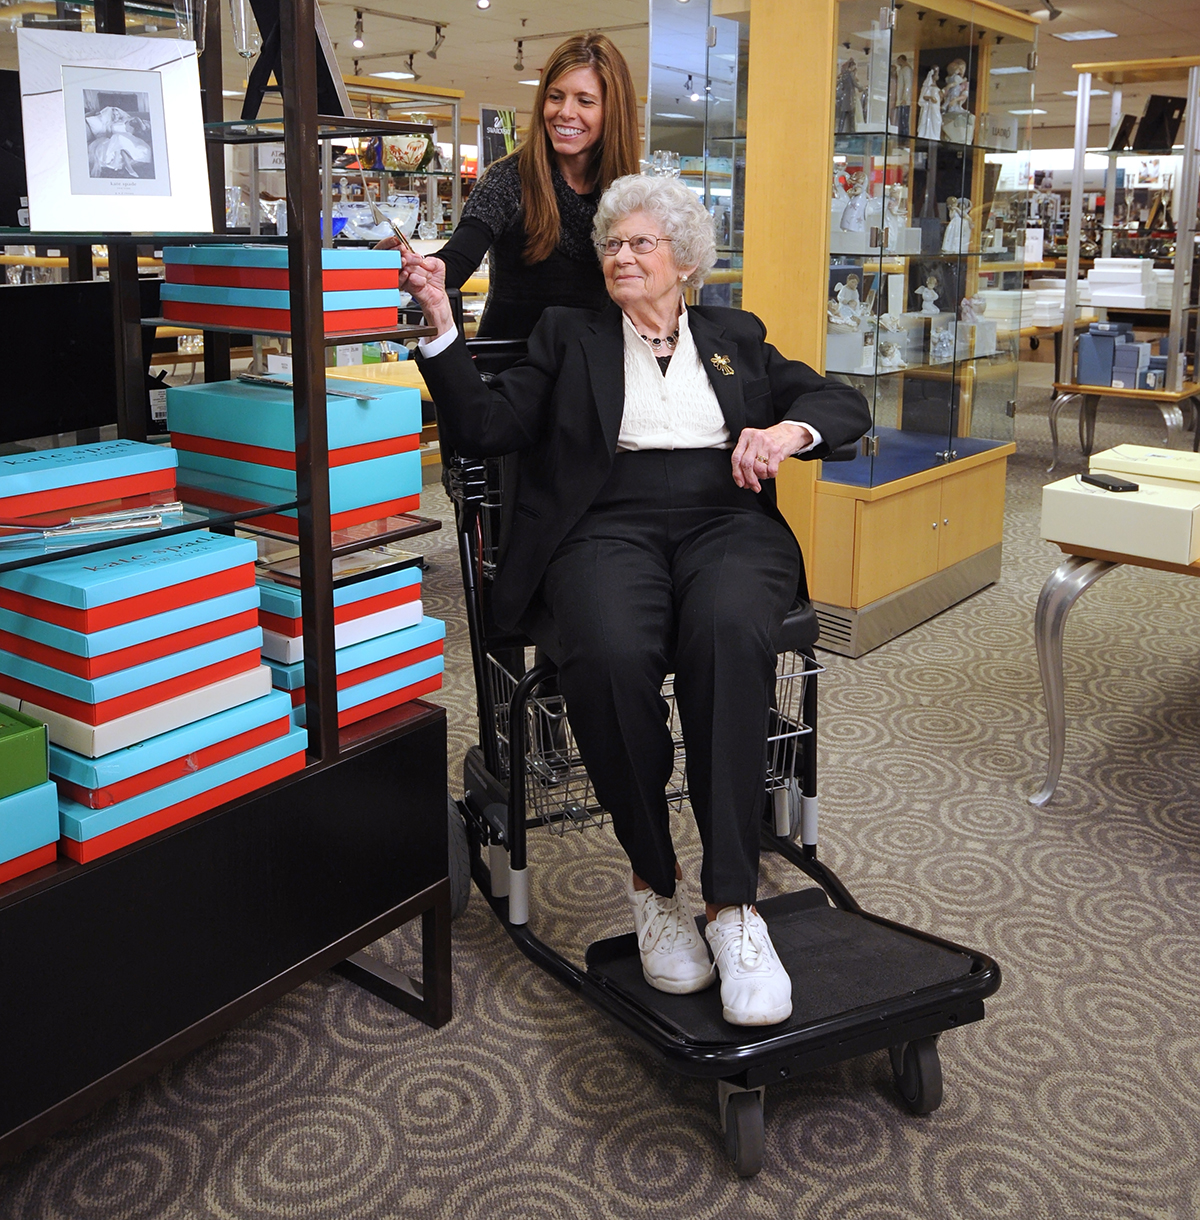 Amigo Smartchair is a wheelchair alternative for retail stores and malls